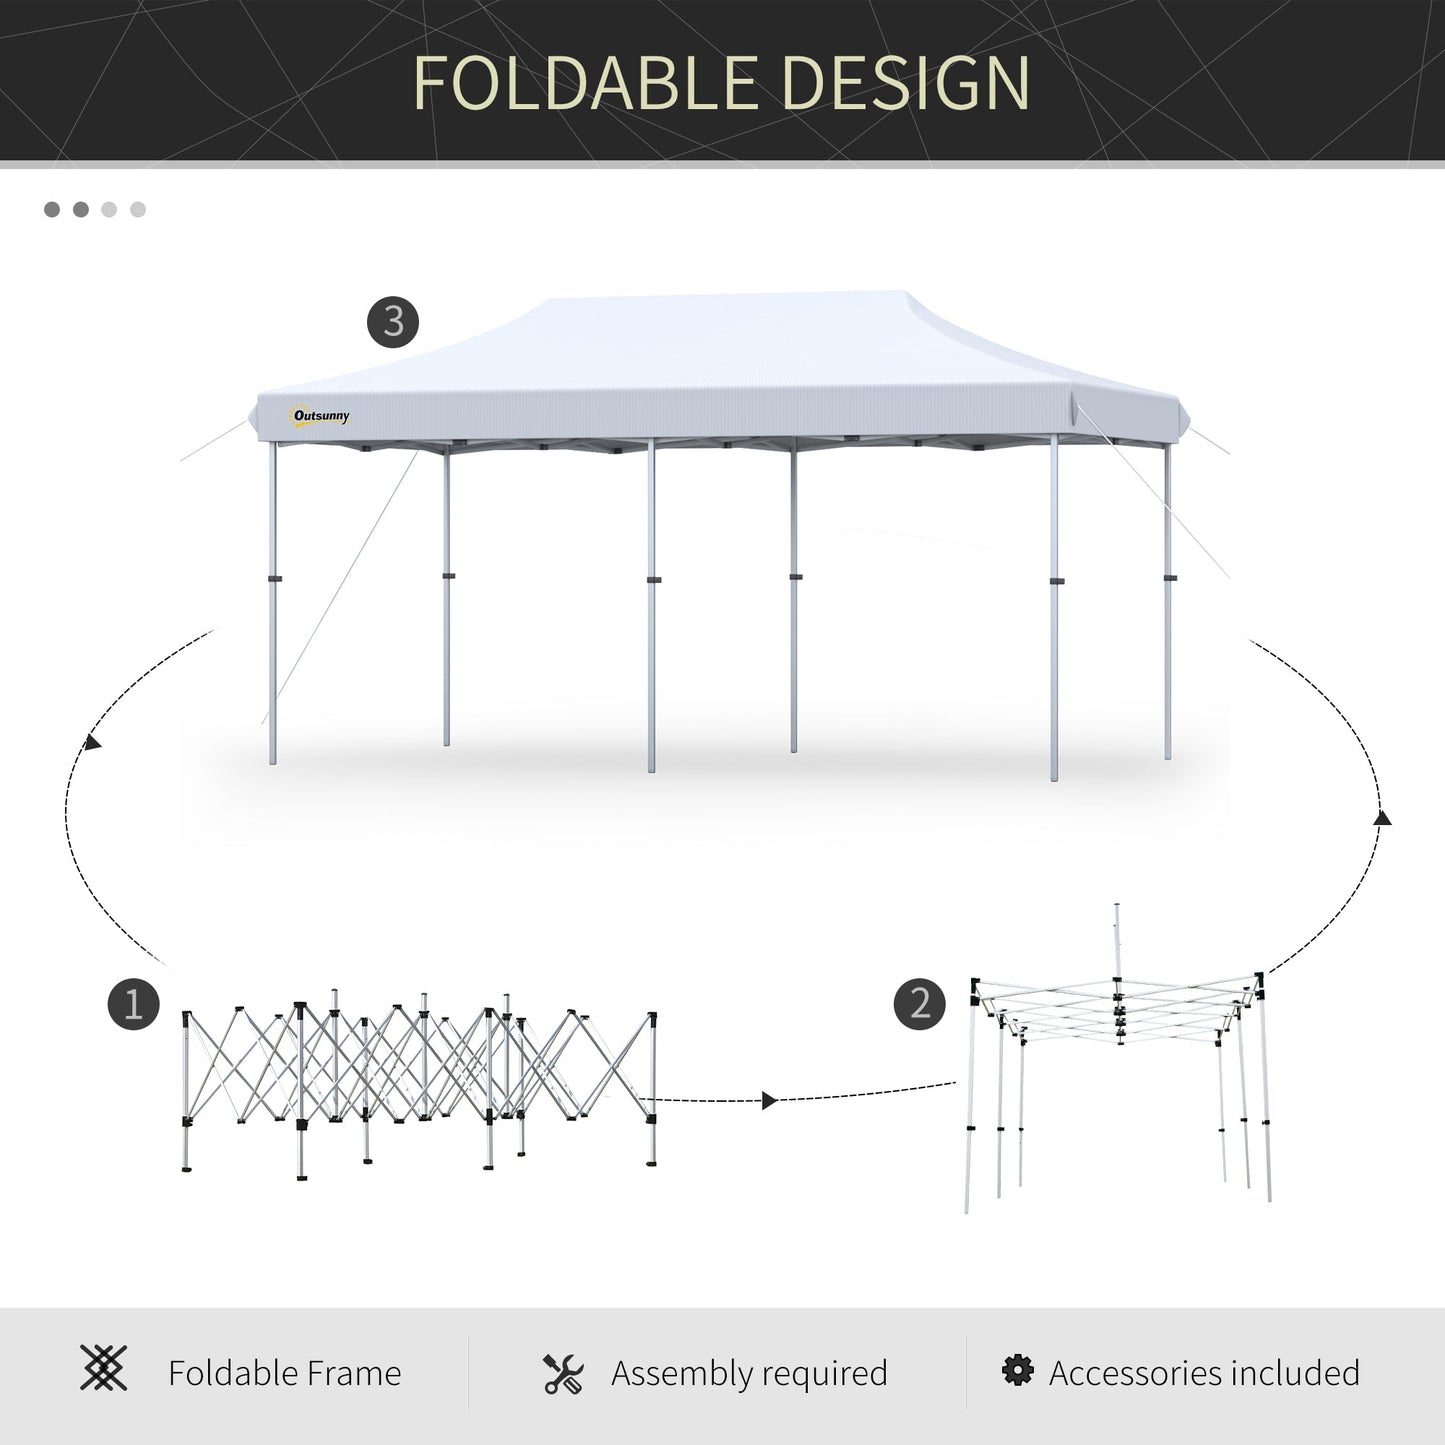 Outdoor and Garden-20' x 10' Garden Foldable Pop Up Canopy Tent Gazebo Aluminum Frame with Adjustable Legs & Roller Bag - Outdoor Style Company